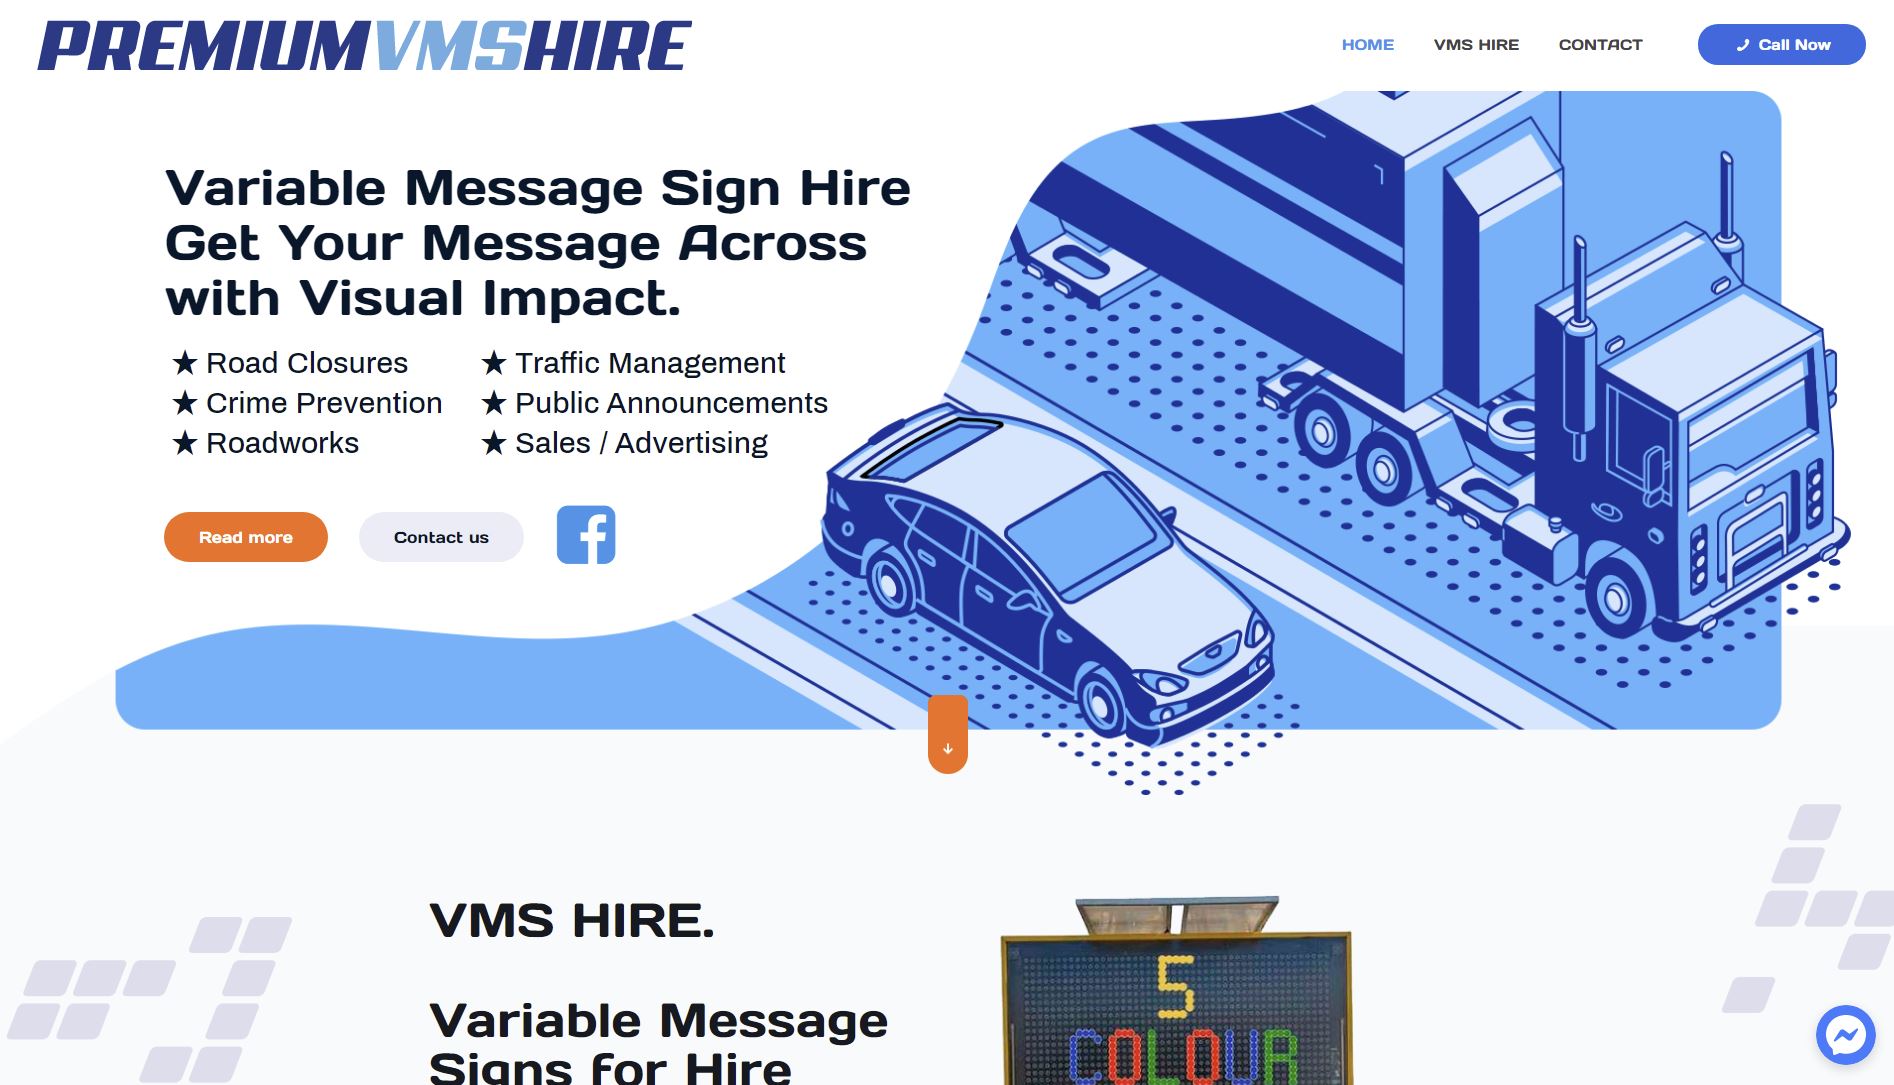 Premium VMS Hire - Variable Message Signs for hire across Perth WA